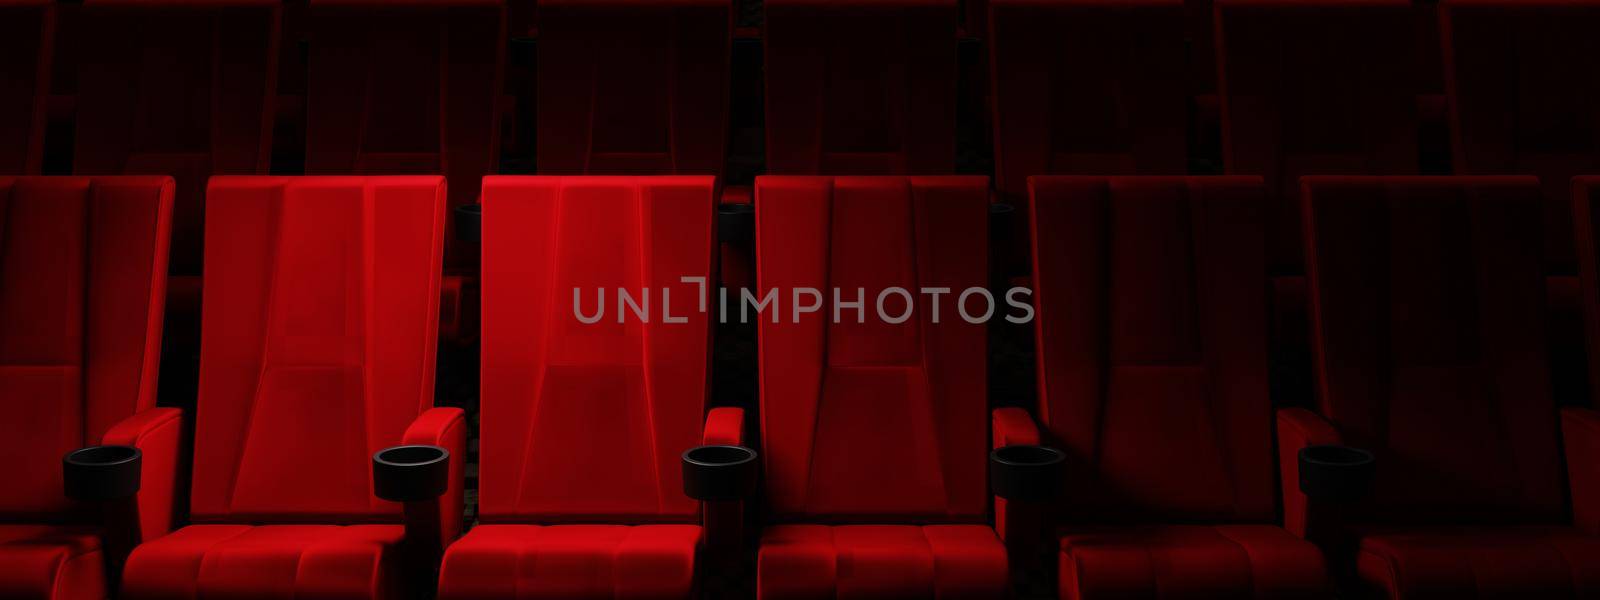 Rows of red velvet seats watching movies in the cinema with spotlight only couple deluxe seat background. Entertainment and Theater concept. 3D illustration rendering by MiniStocker